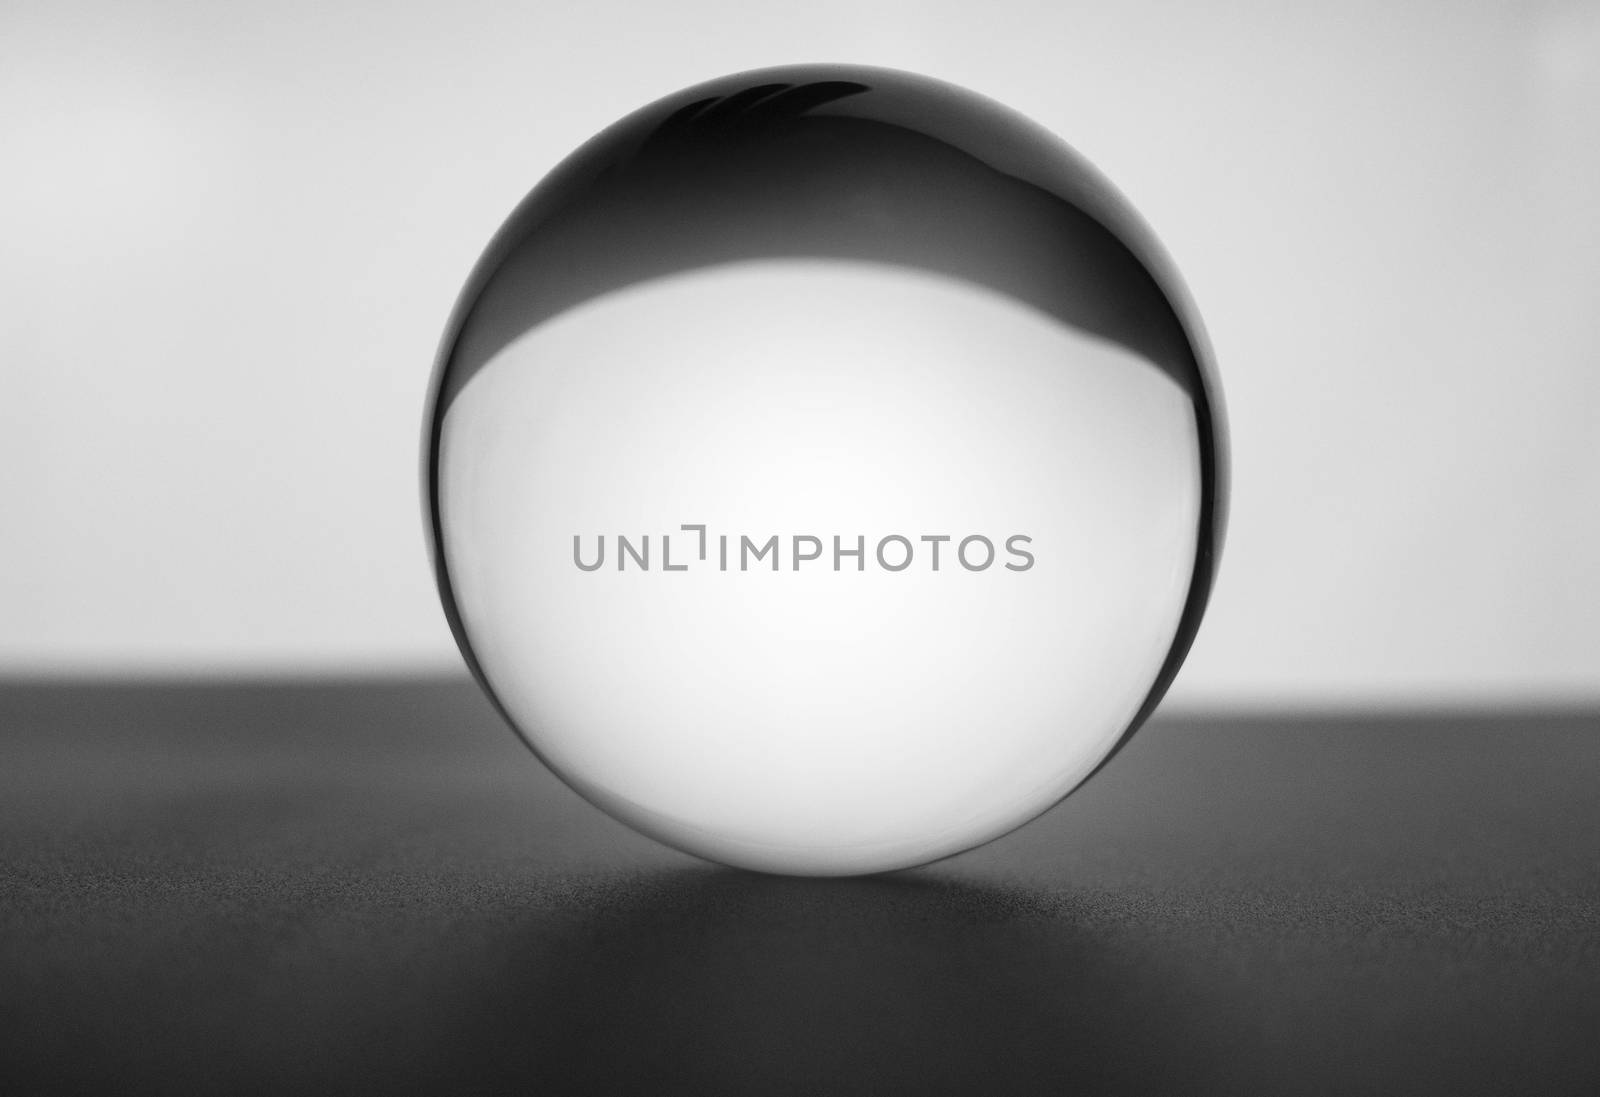 Crystal glass ball sphere transparent on grey gradient background.